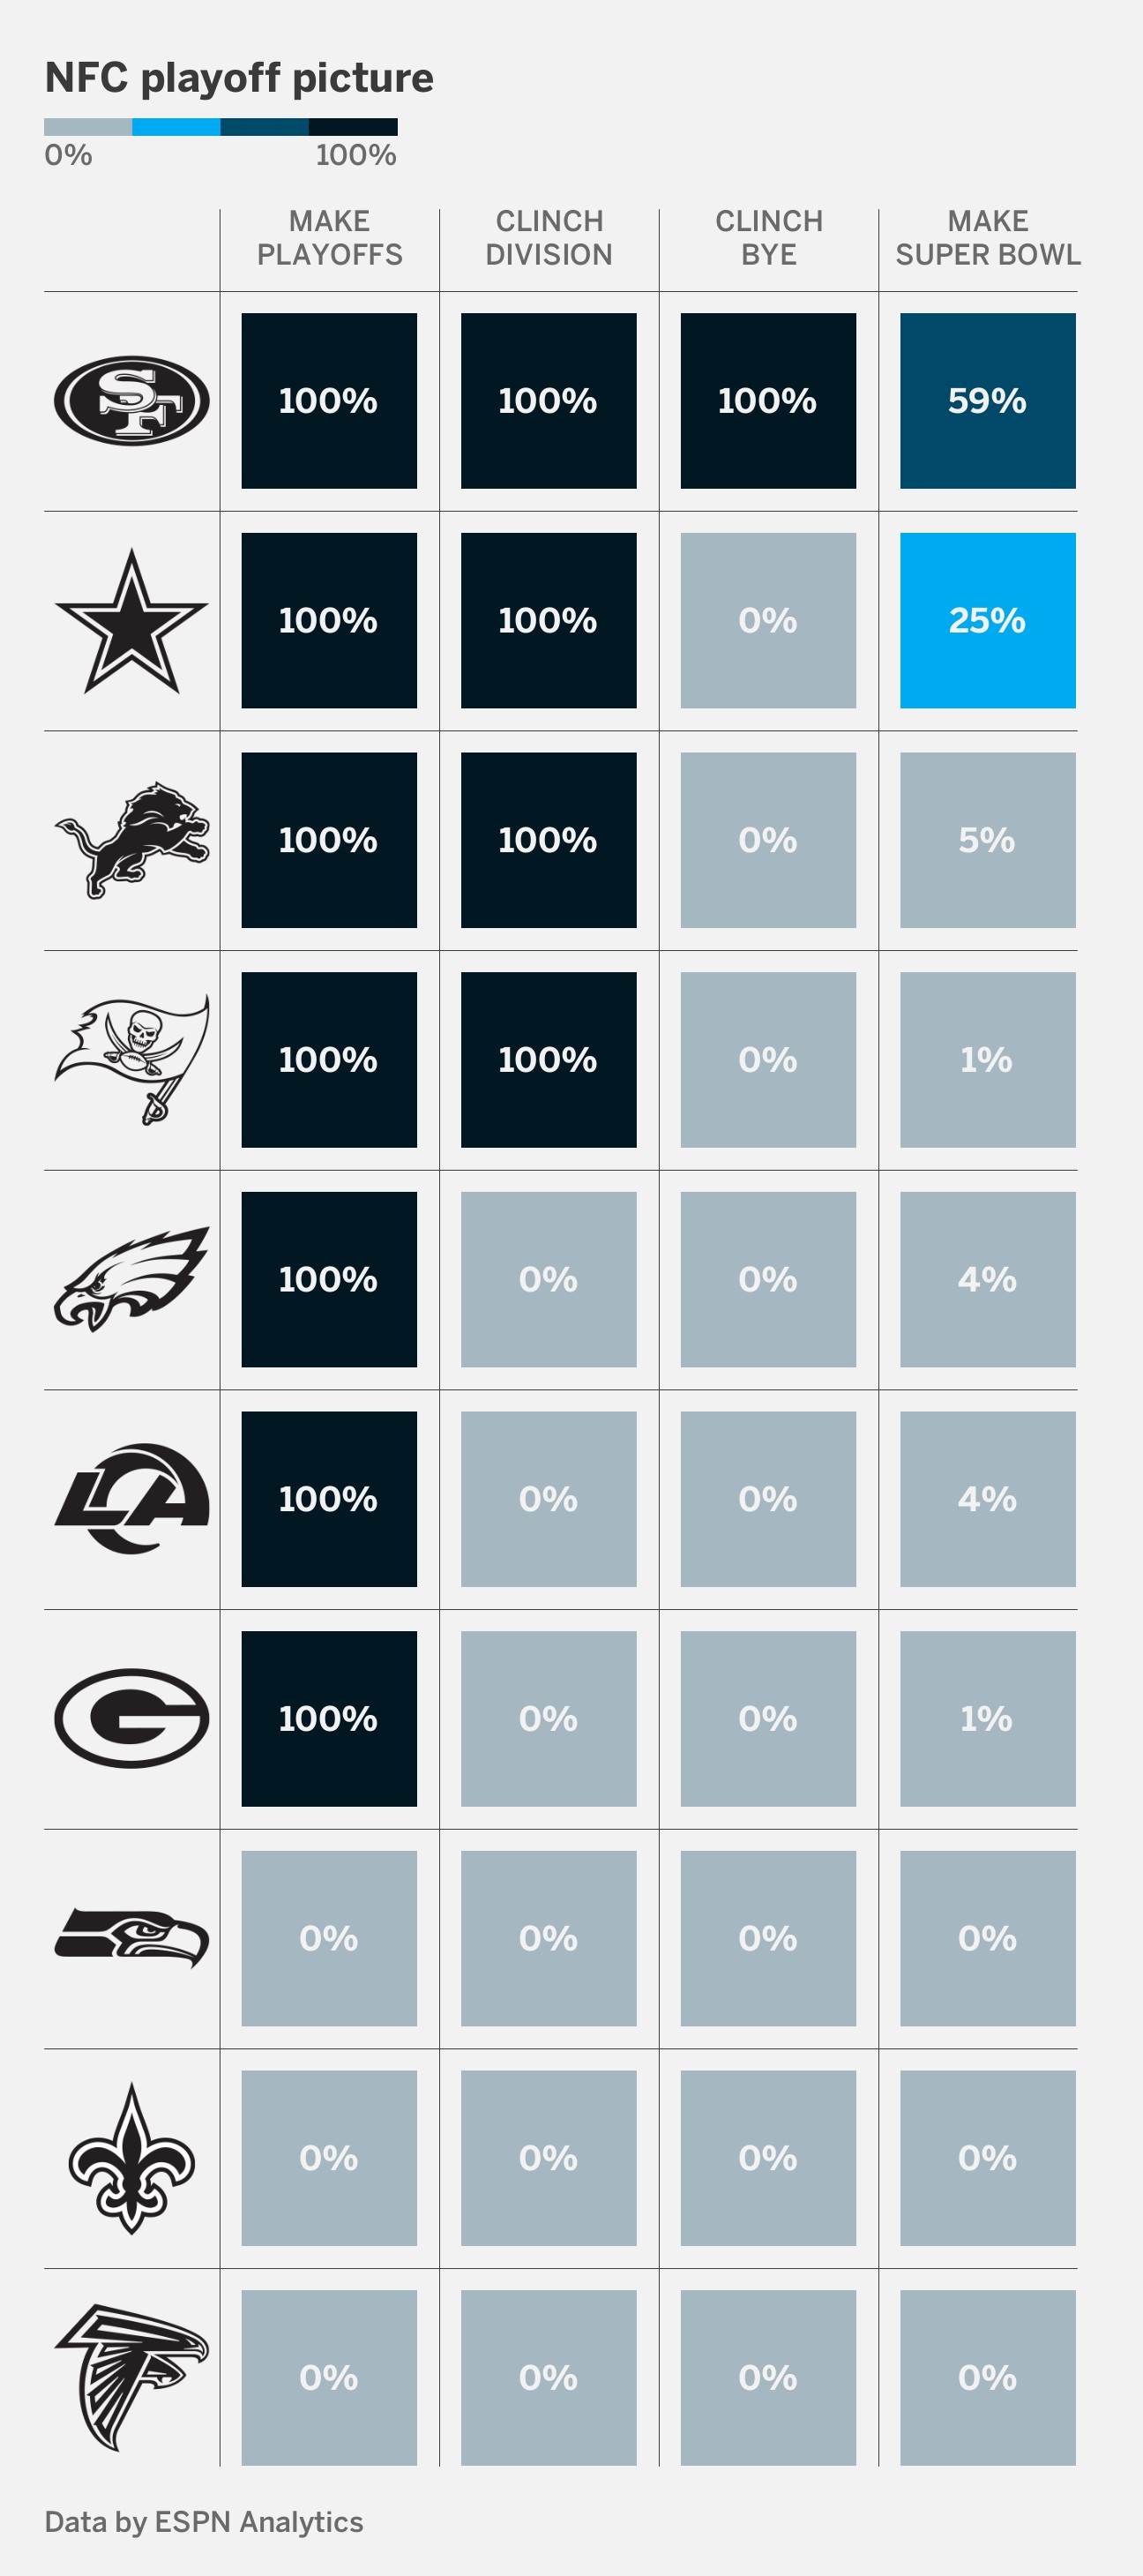 updated nfl playoff picture